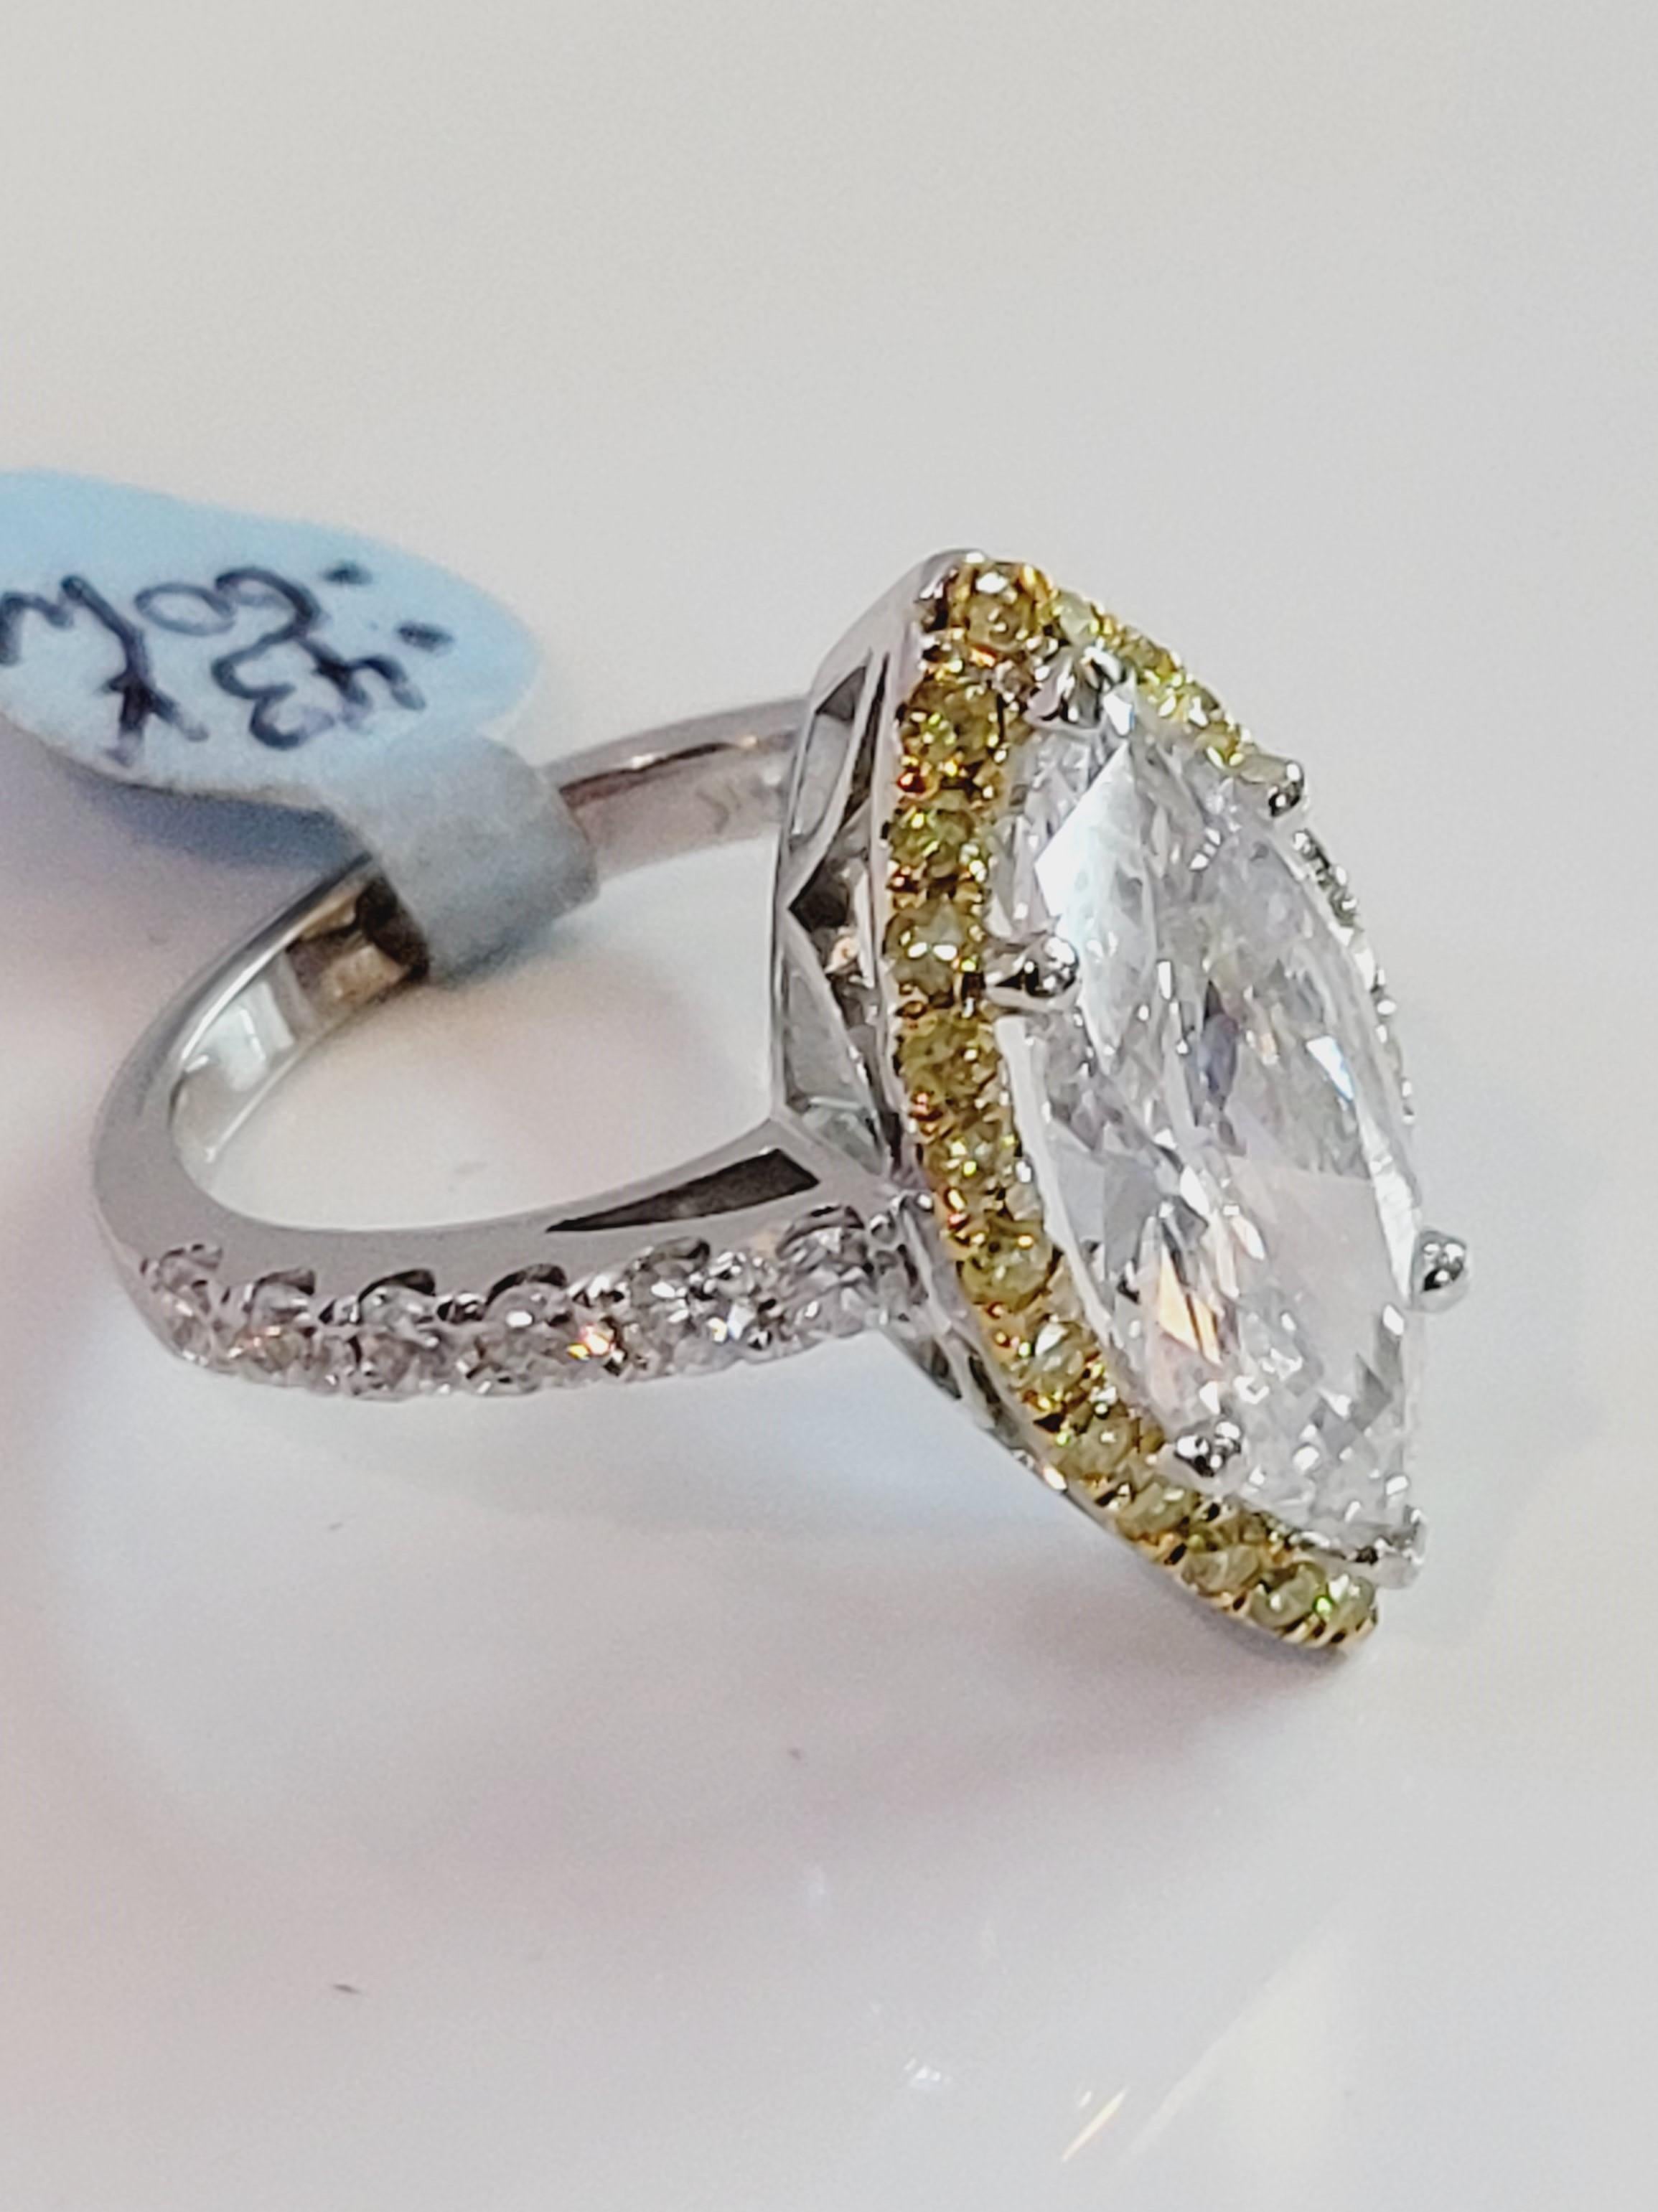 Hand Made 
14K White Gold 
Gender Women
Condition New 
Center Diamond 3.04ct 
Clarity SI
Color Grade I
White Dia .60ct 
Clarity VS
Color Grade G
Yellow Natural Dia .40ct
This Ring is Resizable 
Retail Price:$85000